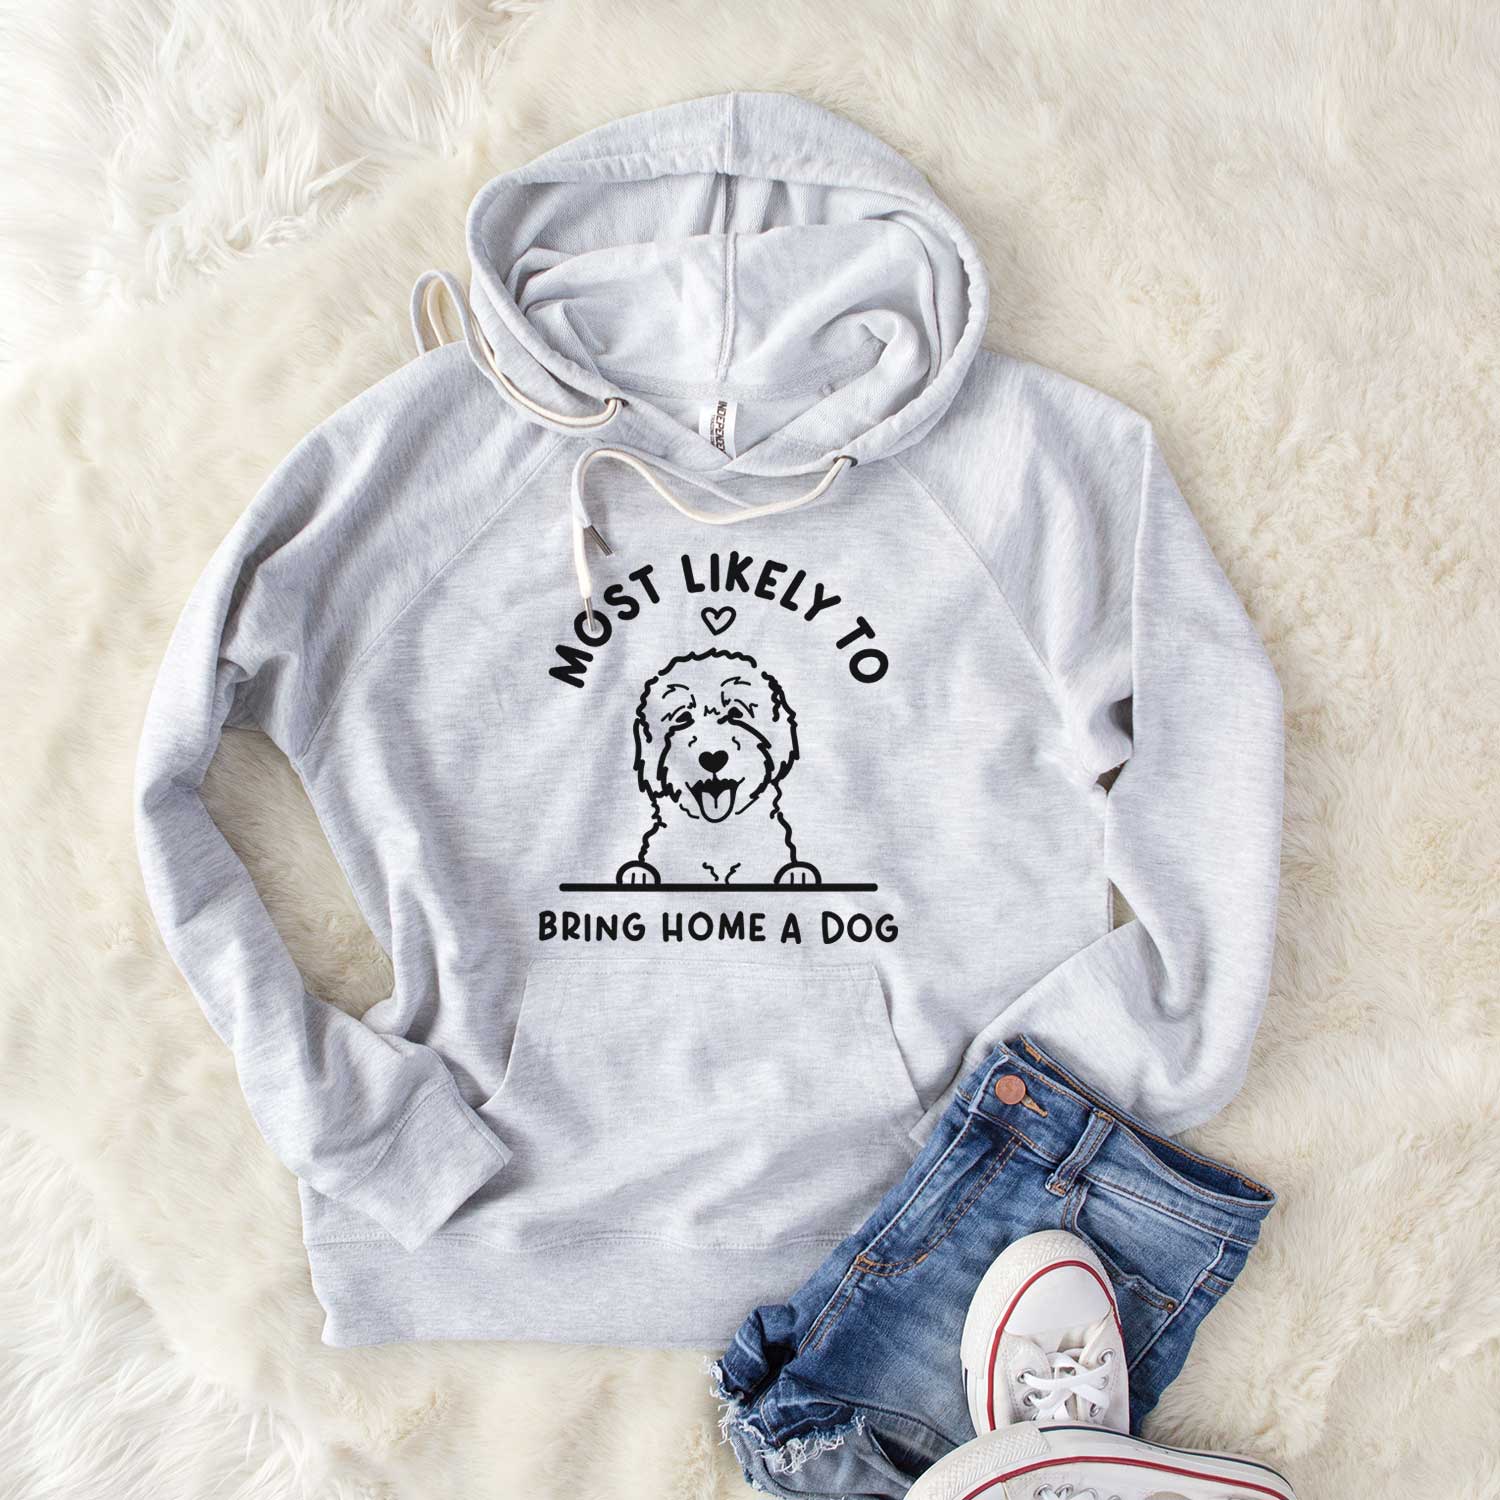 Most Likely to Bring Home a Dog - Goldendoodle/Labradoodle - Unisex Loopback Terry Hoodie